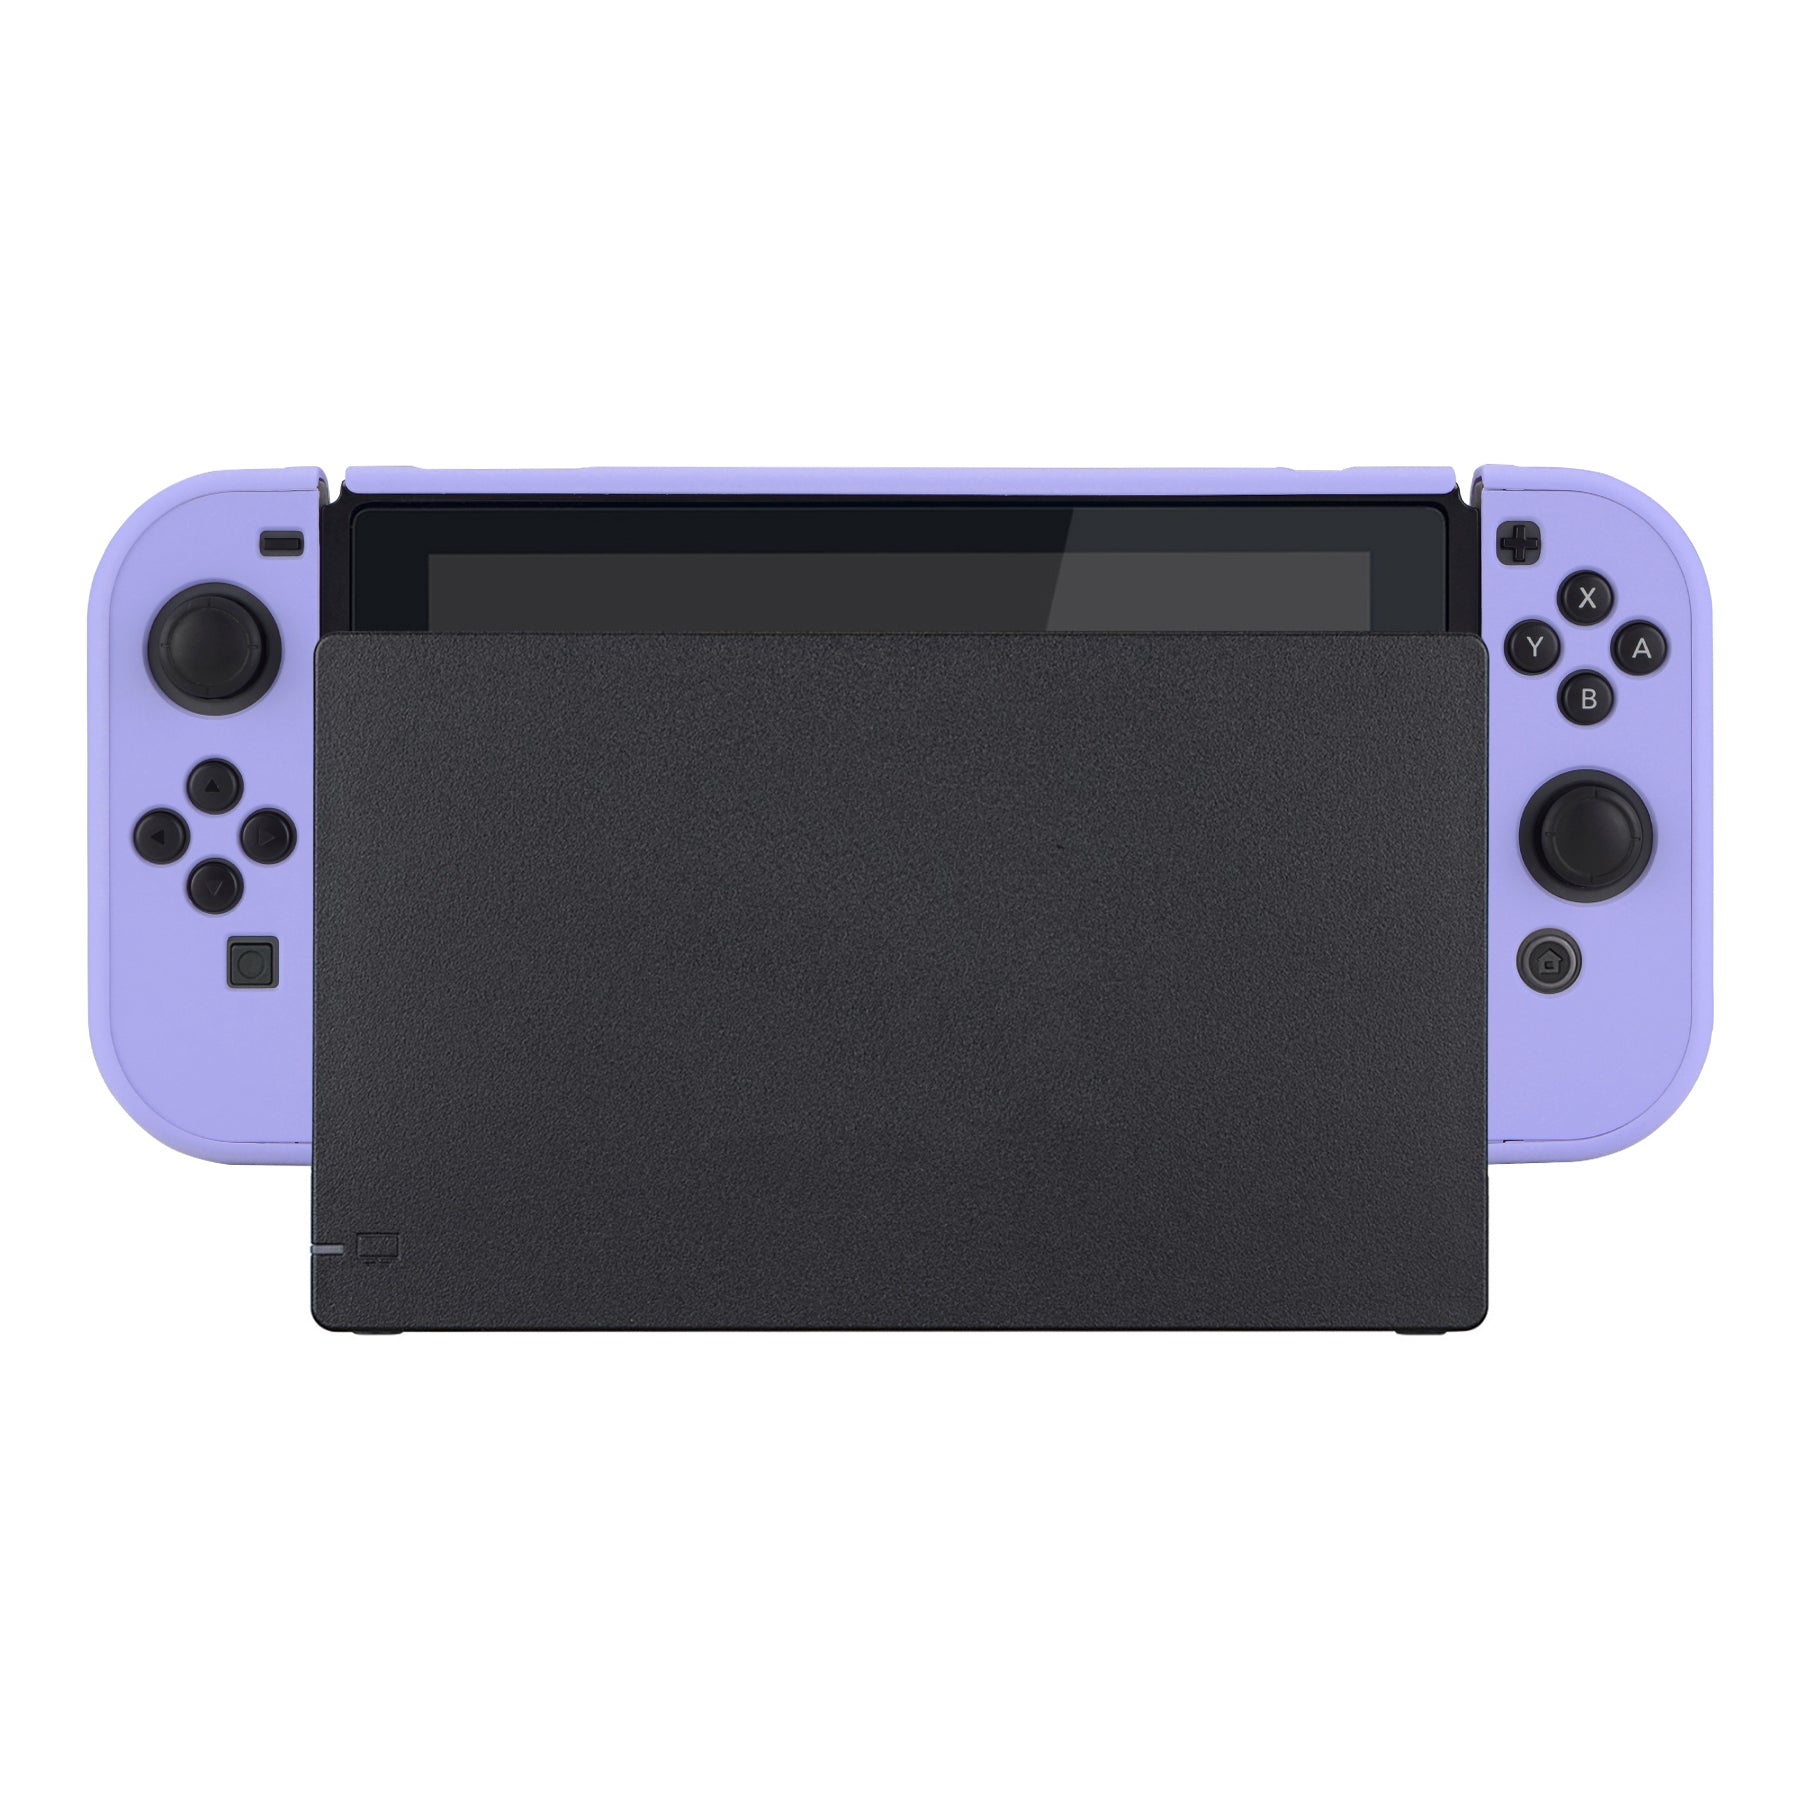 PlayVital Light Violet Back Cover for Nintendo Switch Console, NS Joycon Handheld Controller Separable Protector Hard Shell, Soft Touch Customized Dockable Protective Case for Nintendo Switch - NTP341 PlayVital